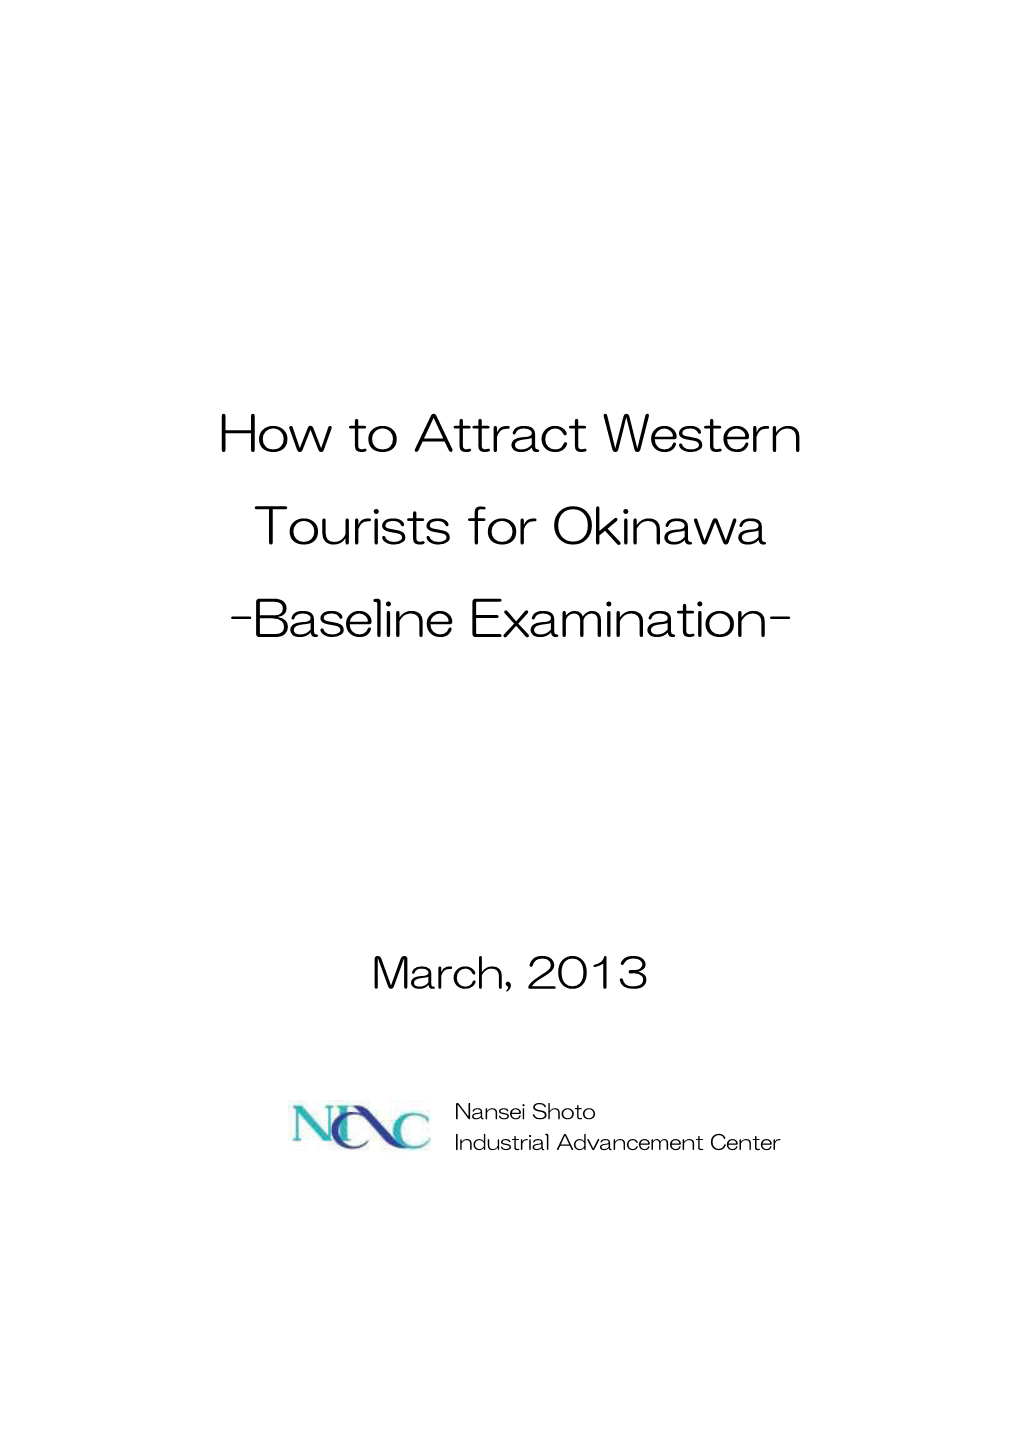 How to Attract Western Tourists for Okinawa -Baseline Examination